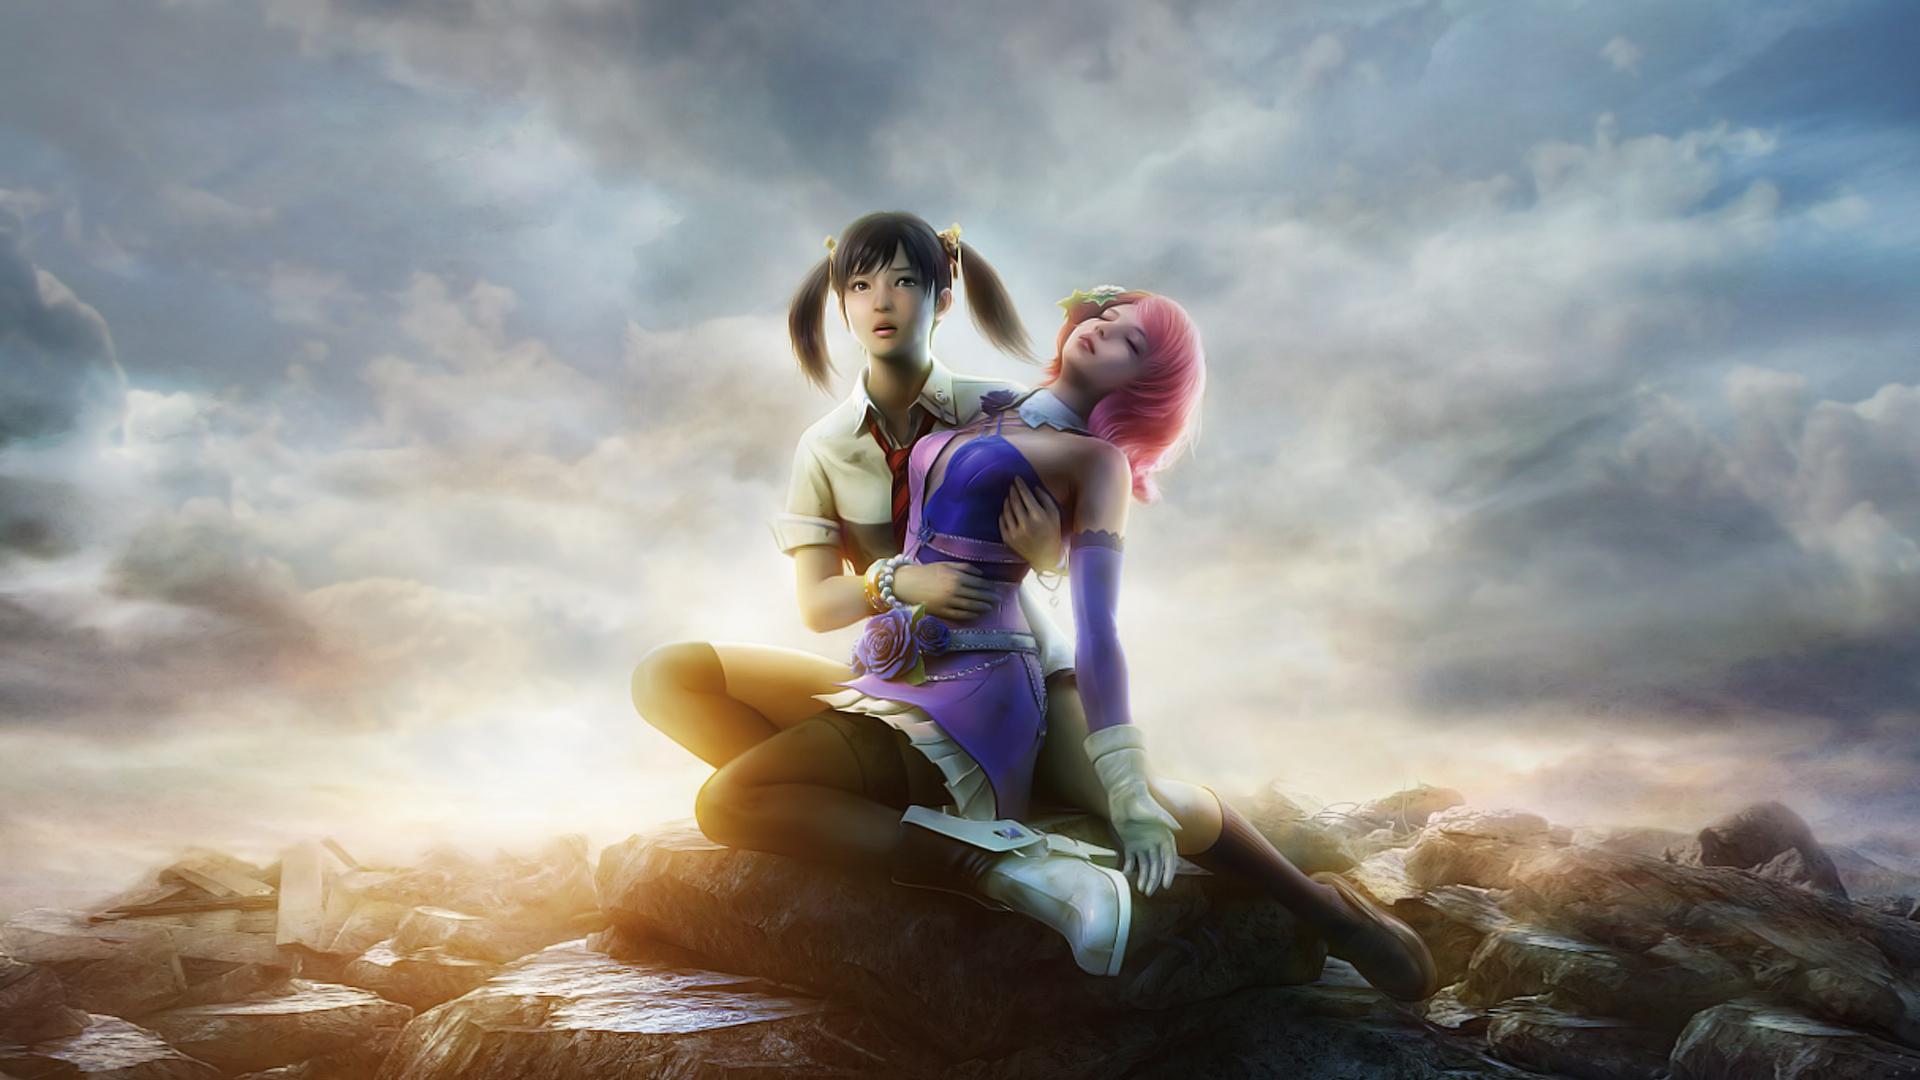 Cool picture of Tekken, picture of Ling Xiaoyu, Alisa